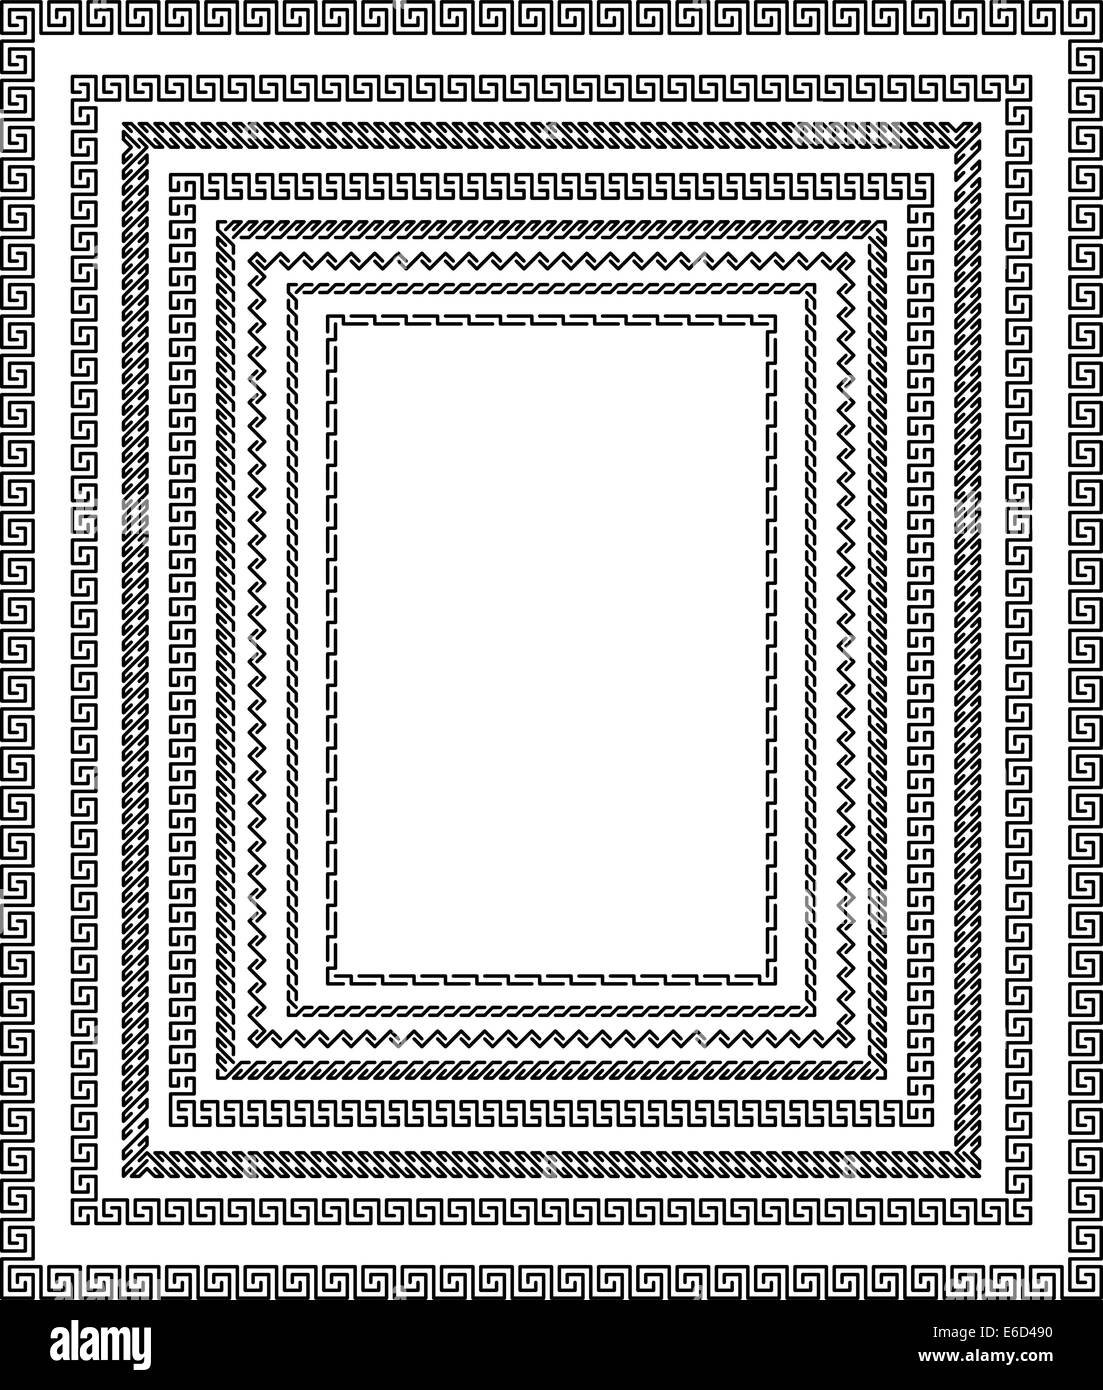 Set of editable vector frame border designs made with unflattened paths to enable changes to line thickness Stock Vector